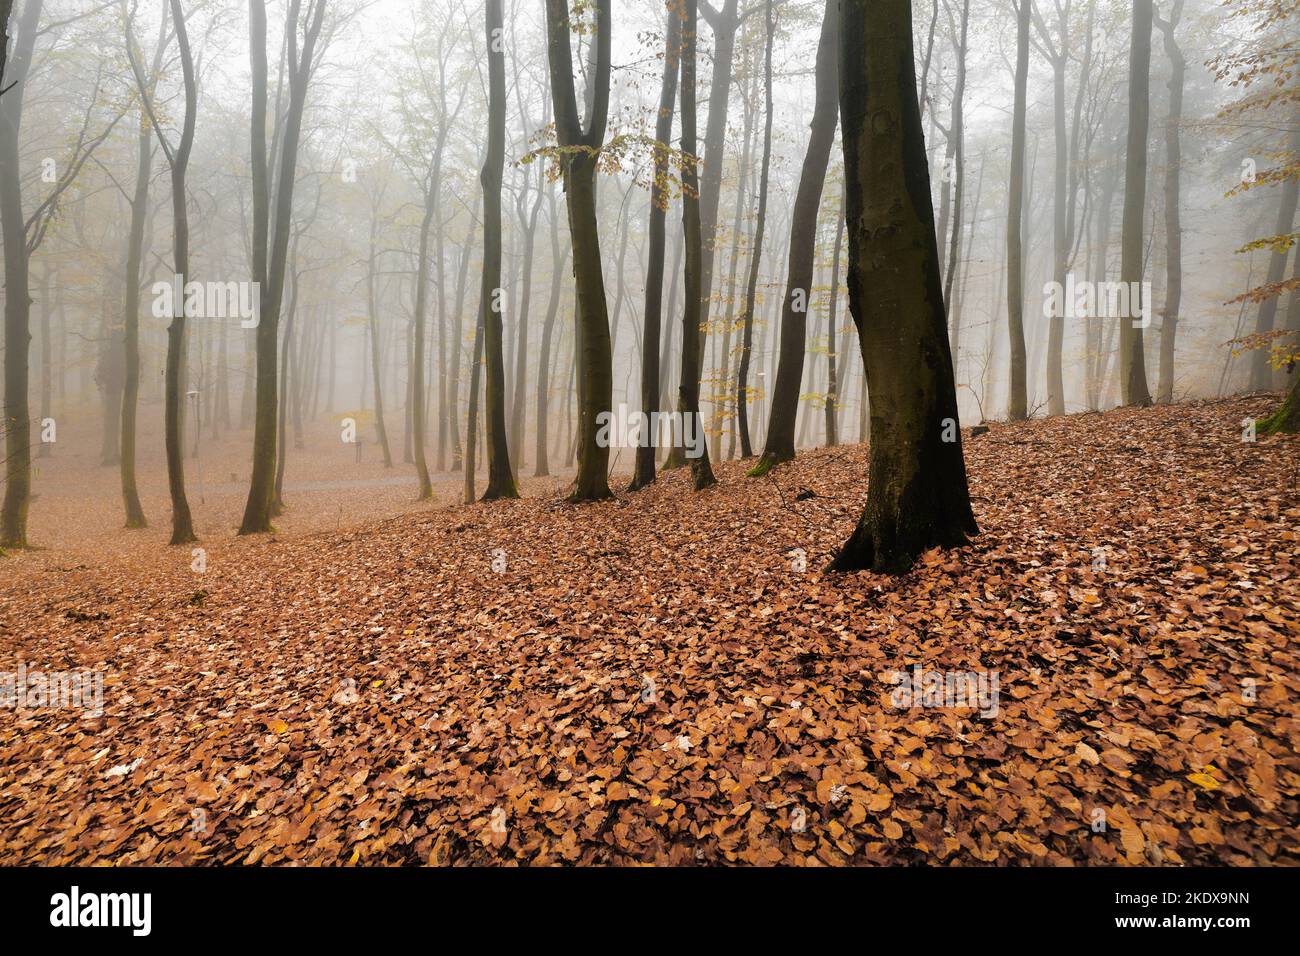 Autumn natural beech forest. Autumn in the forest has its charm Stock Photo  - Alamy